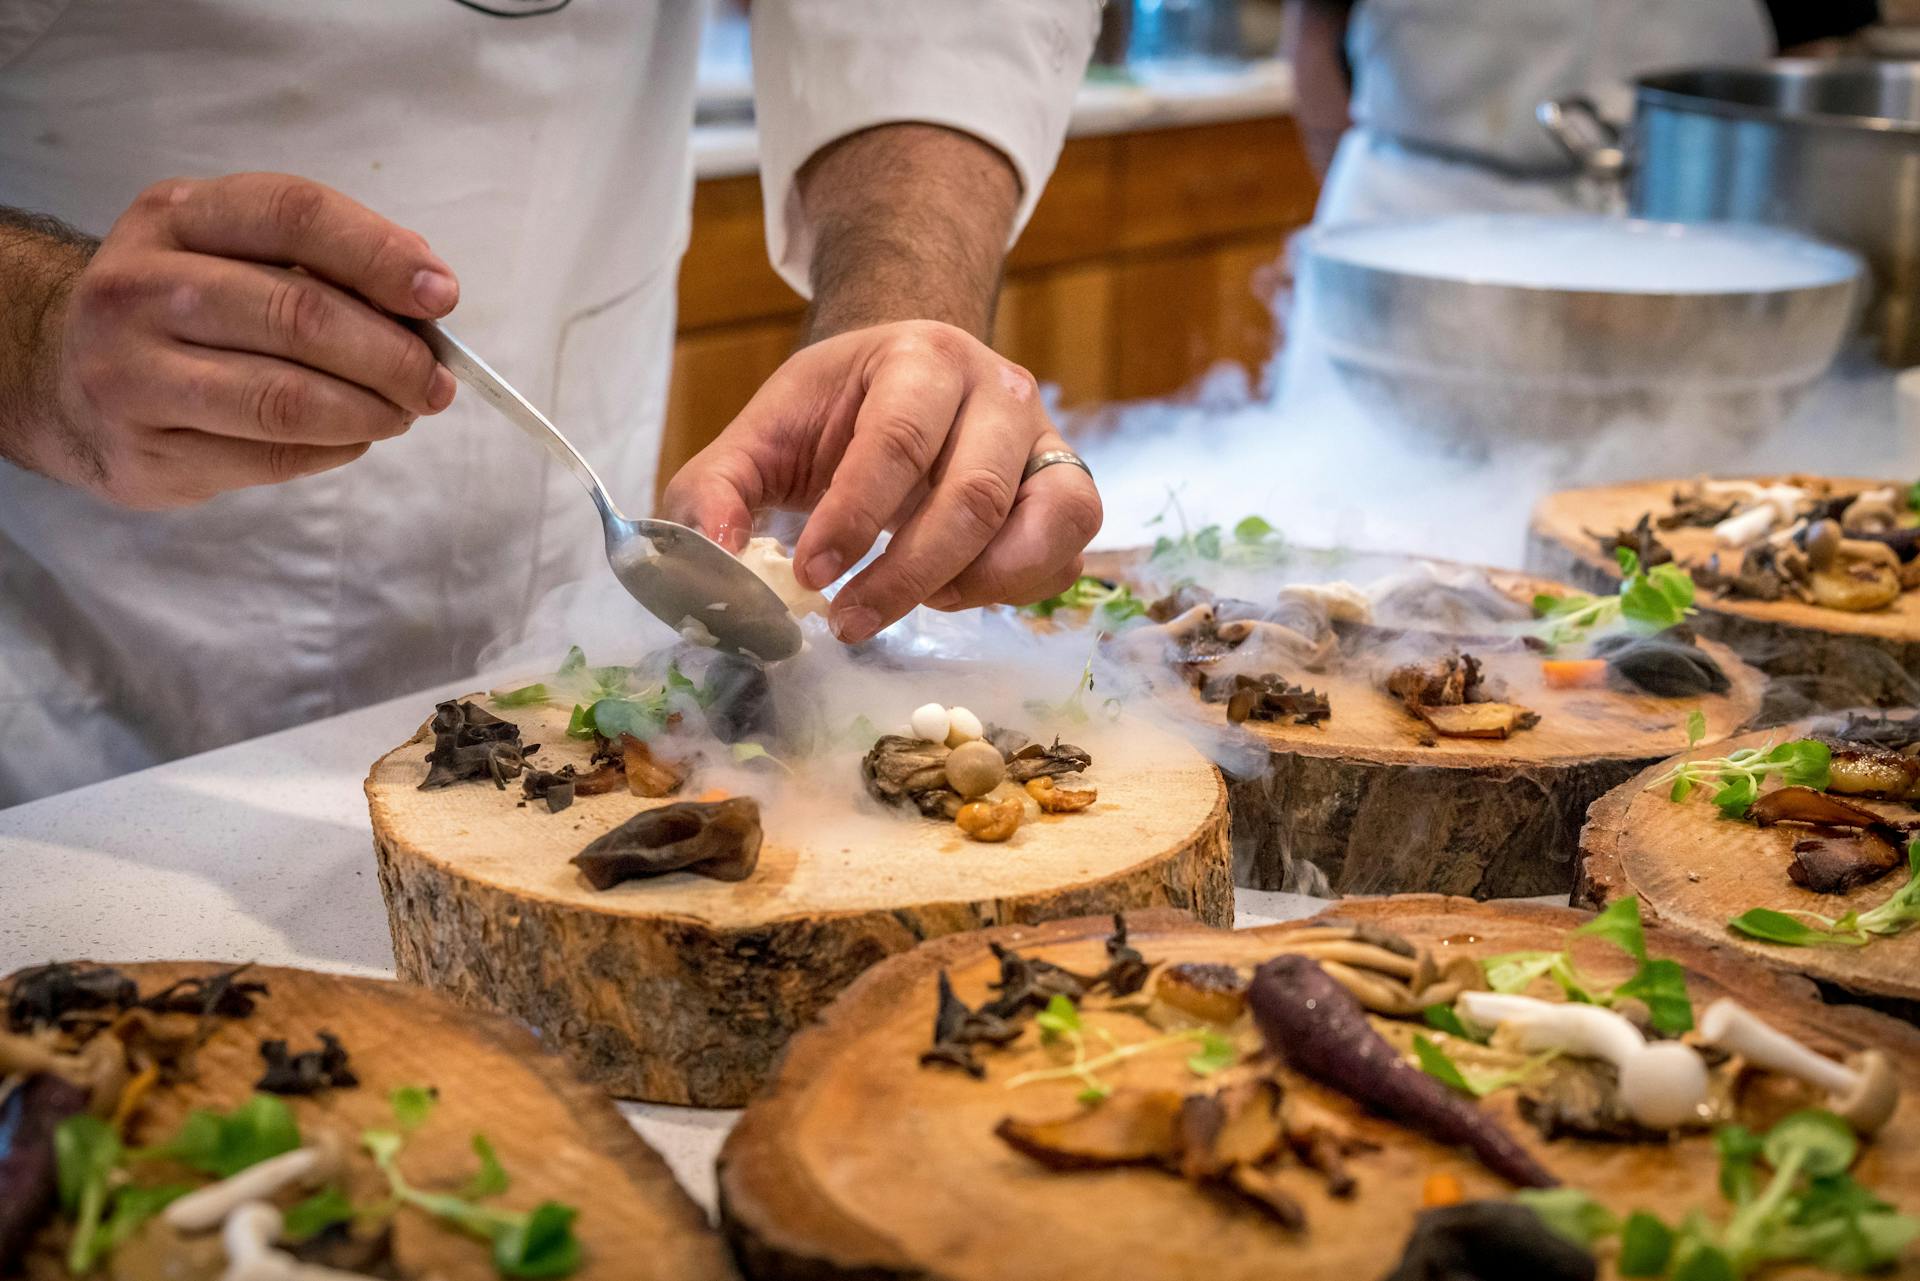 A chef plating up a dish | Source: Pexels